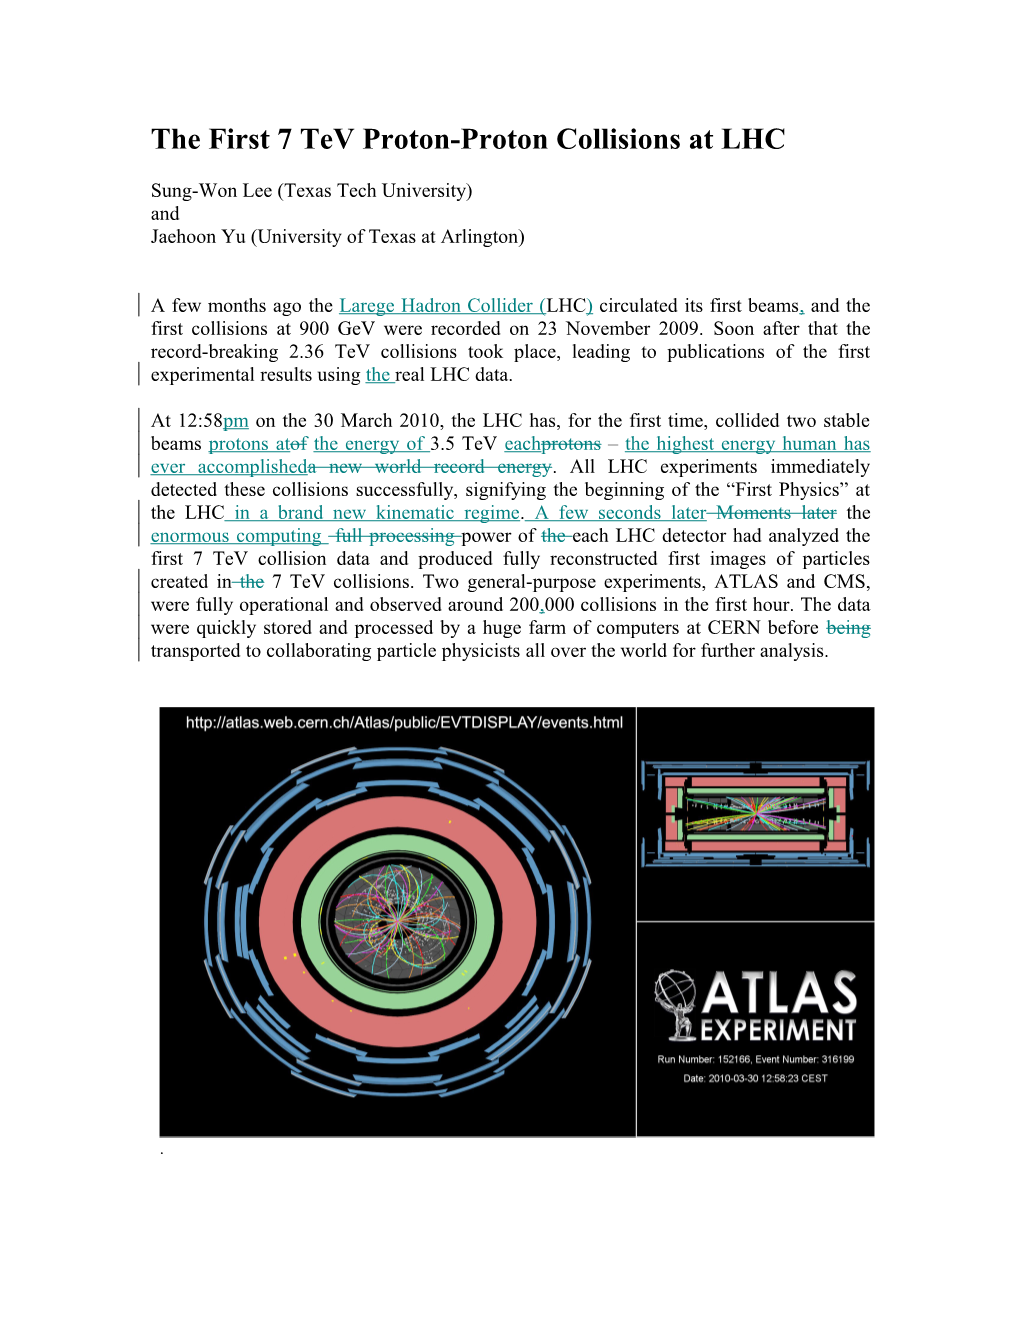 The First 7 Tev Proton-Proton Collisions at LHC